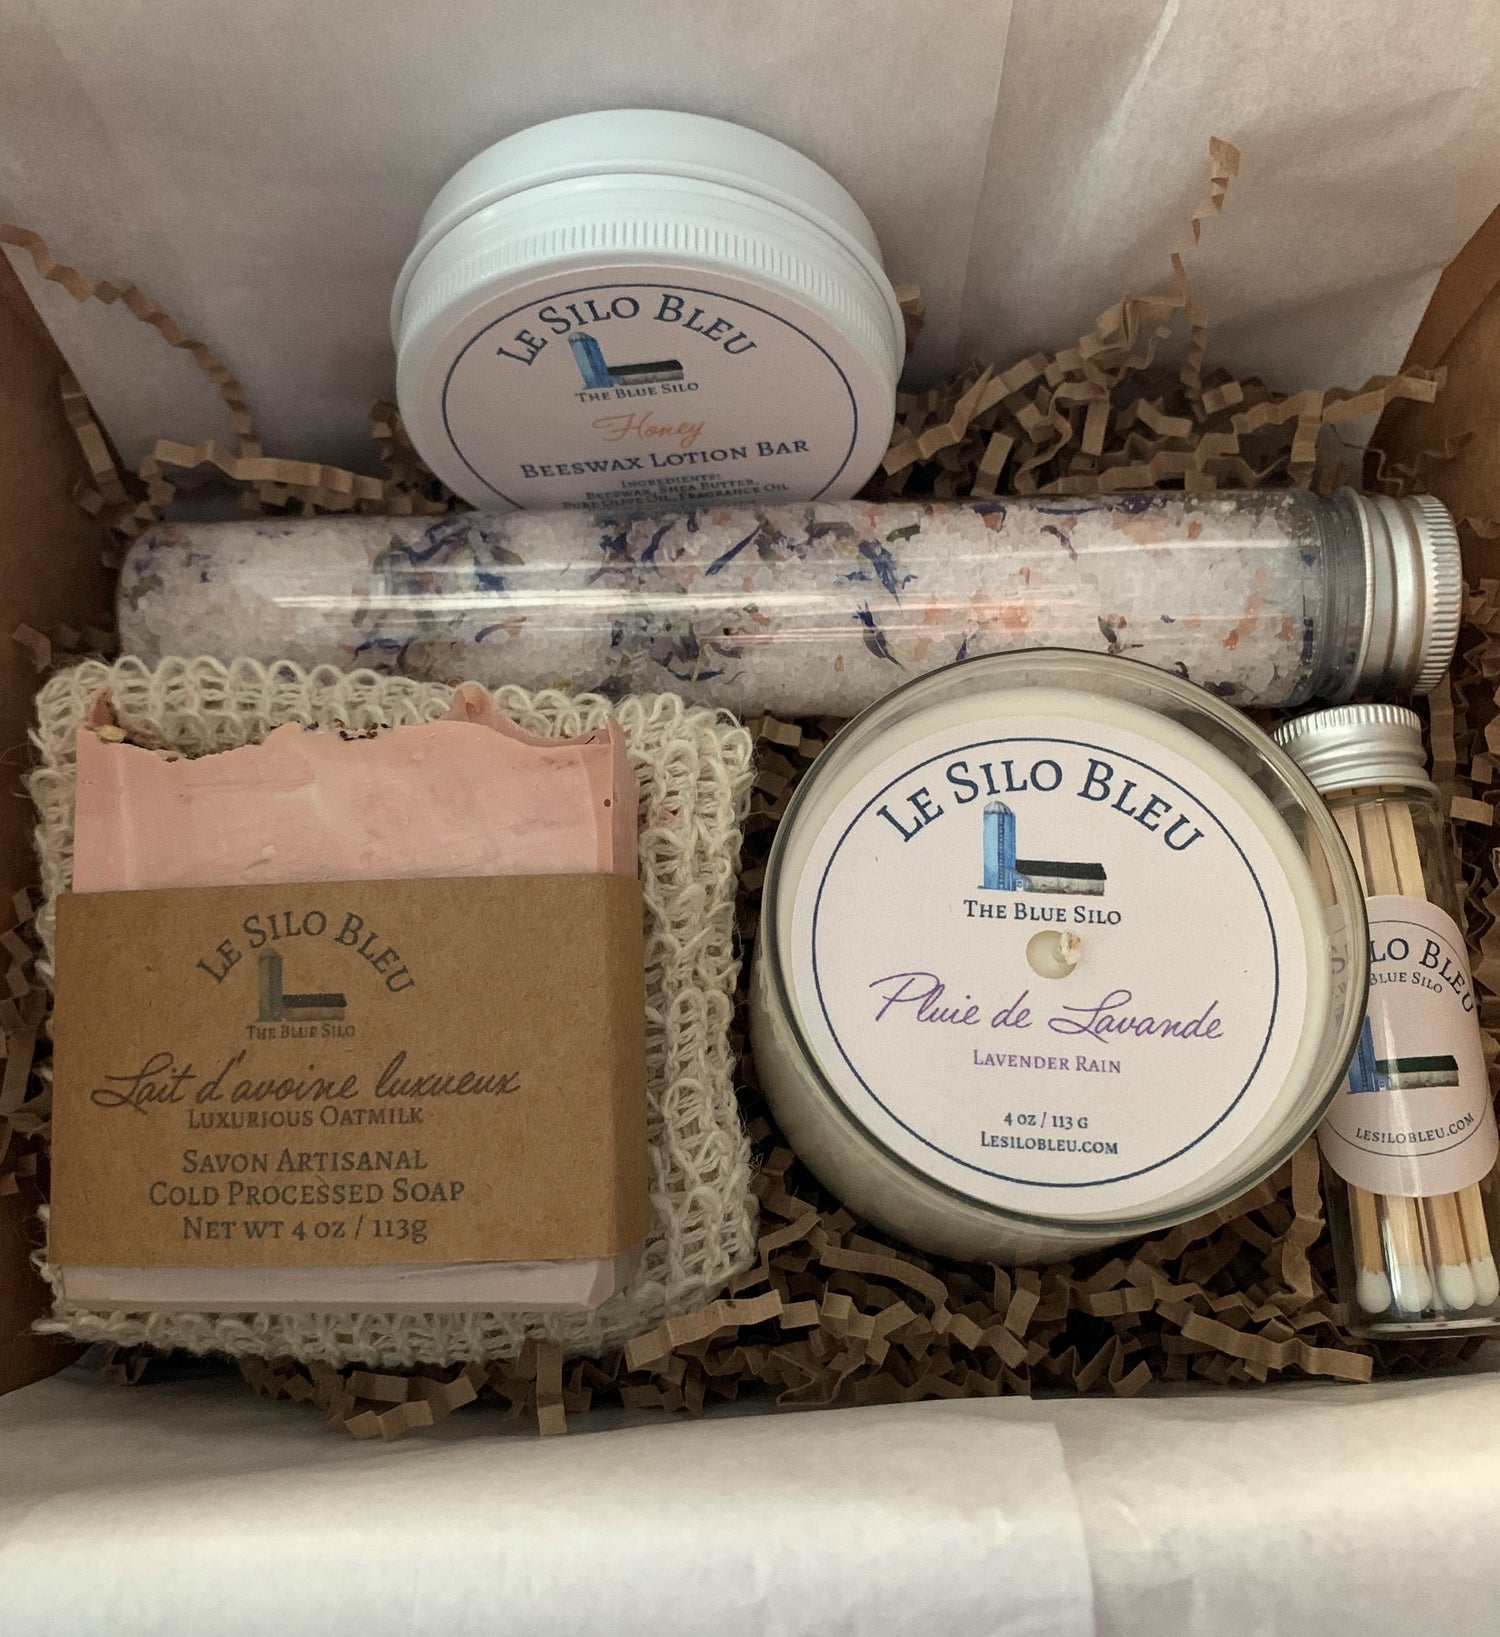 Pamper Yourself Gift Box Including Soap, Small Candle, Bath Salts, Body Lotion and Matches with a Soap Saver Bag, in an Eco-Friendly Gift Box. 